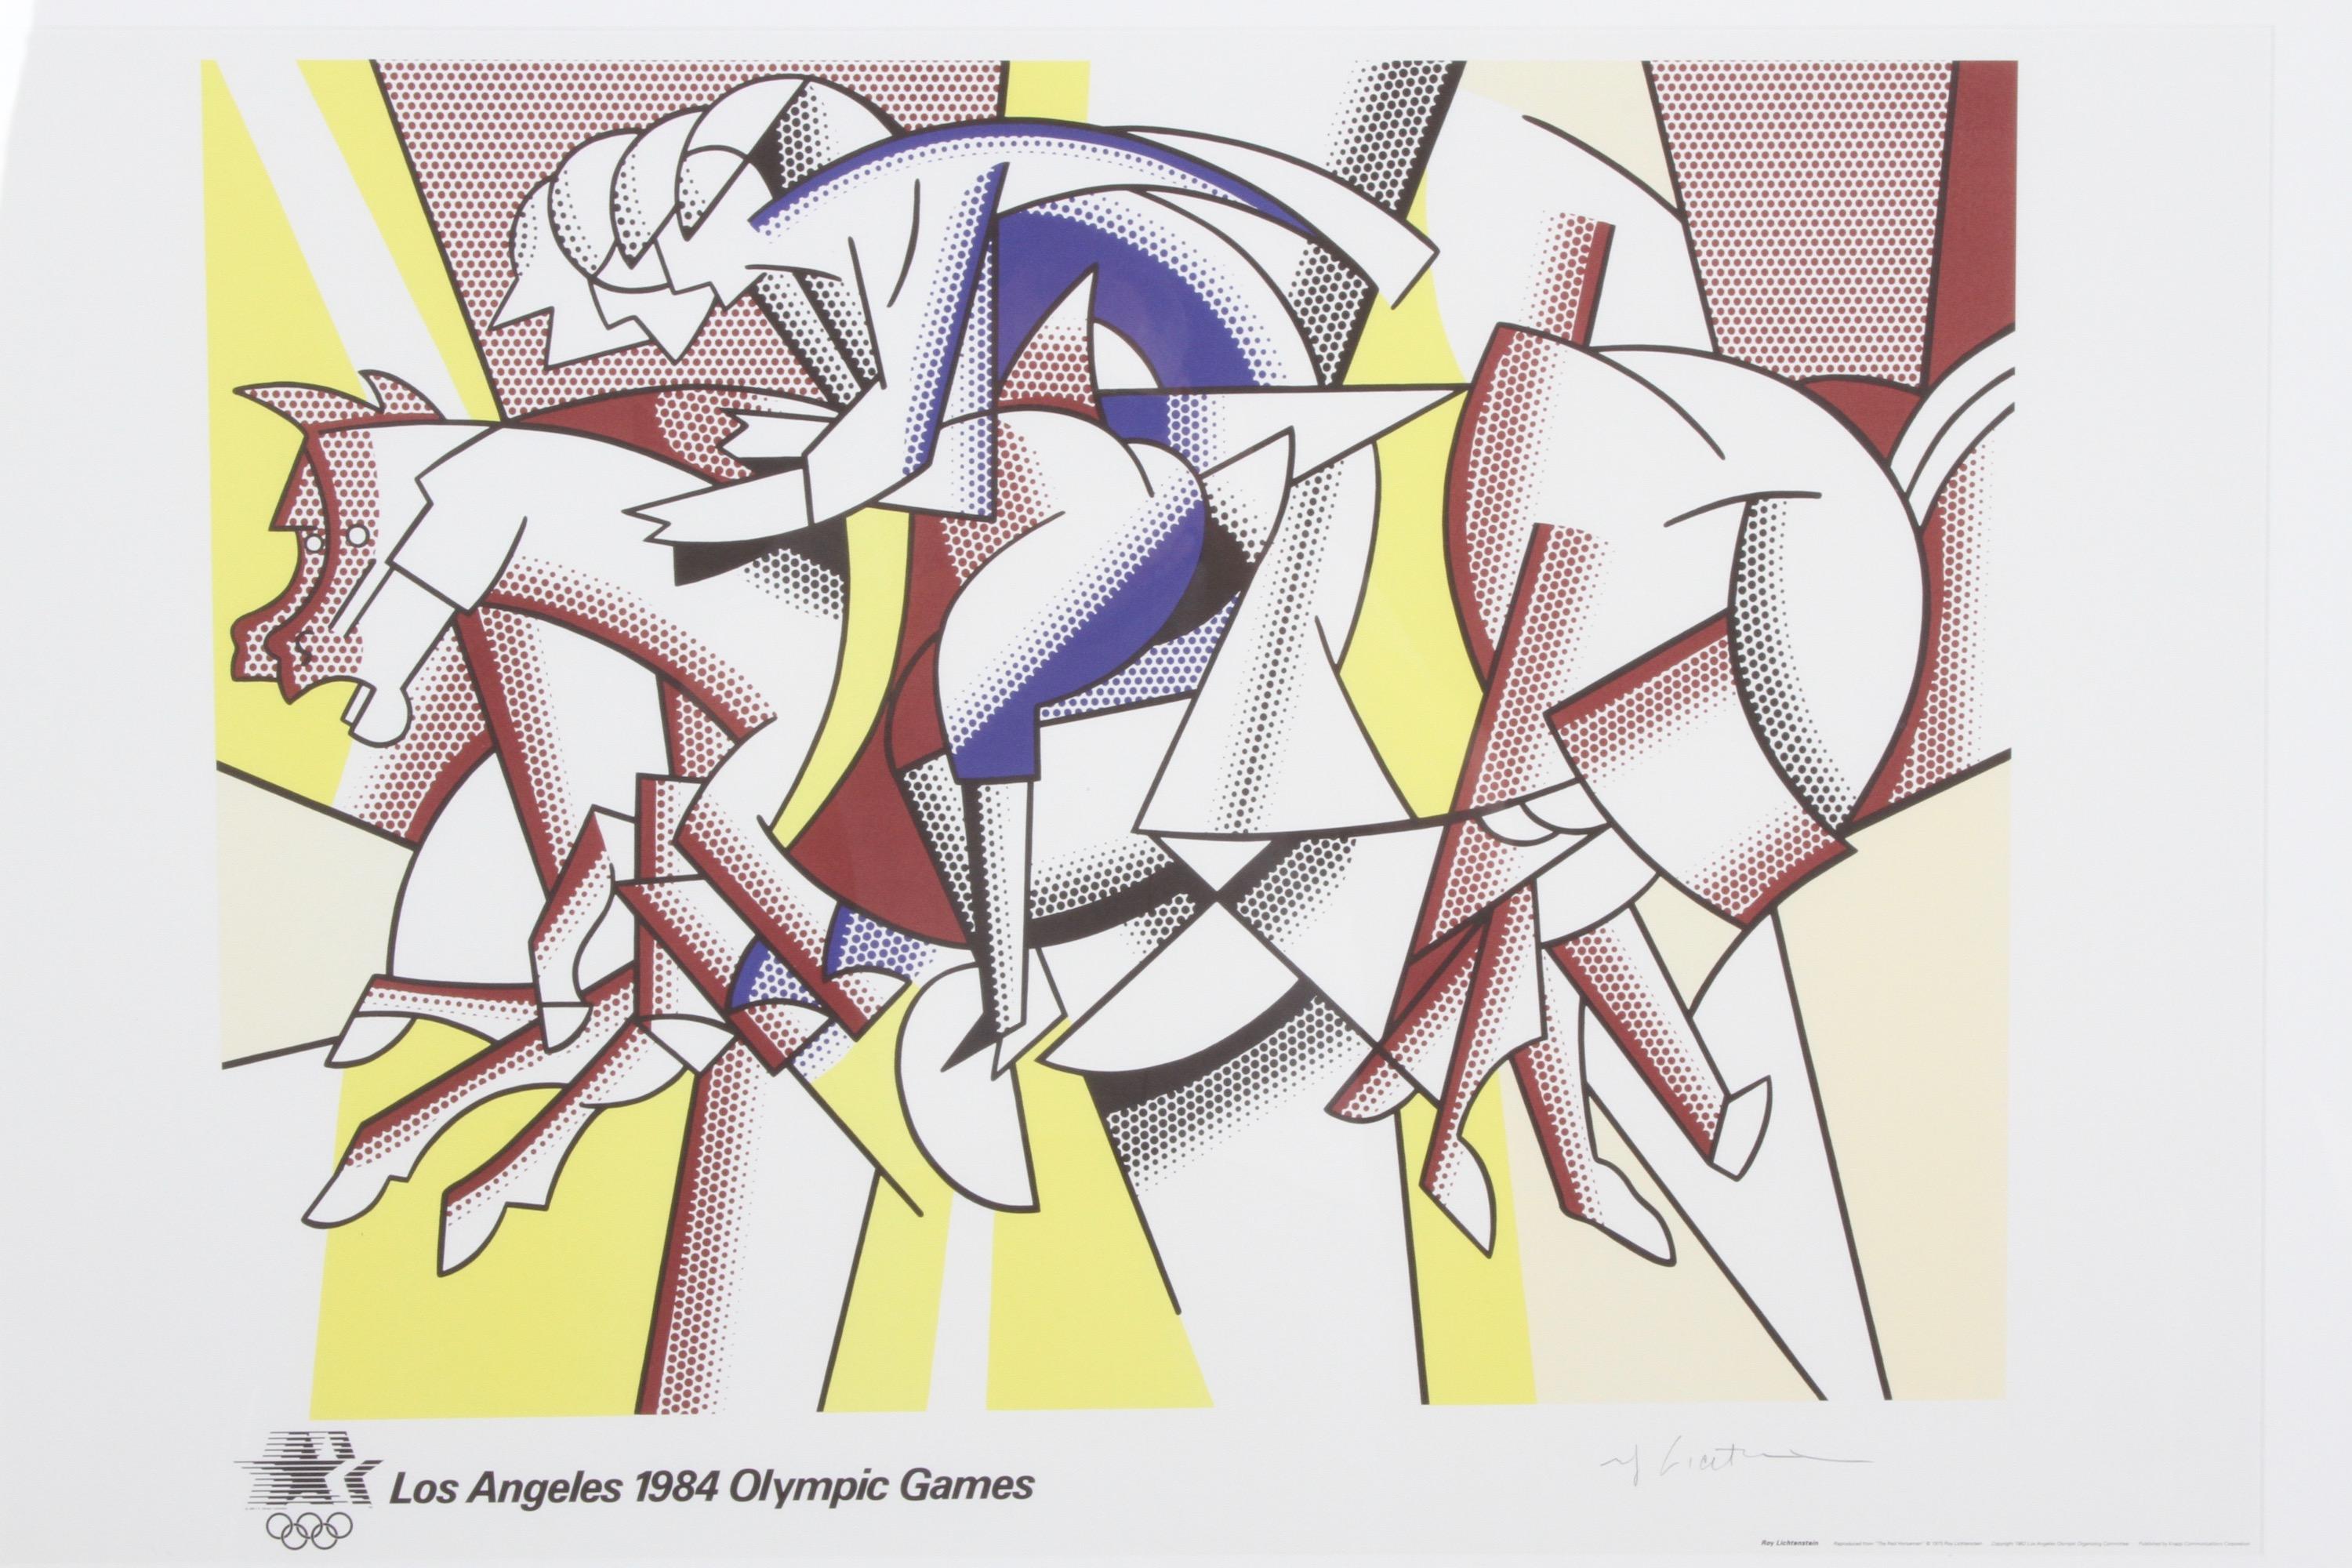 Pop artist Roy Lichtenstein (1923-1997) 1984 Los Angeles Olympic Poster Original Red Horseman. This is one of only 750 hand signed lithographic posters, published in 1982 to celebrate the 1984 Los Angeles, reported that only a few hundred remain